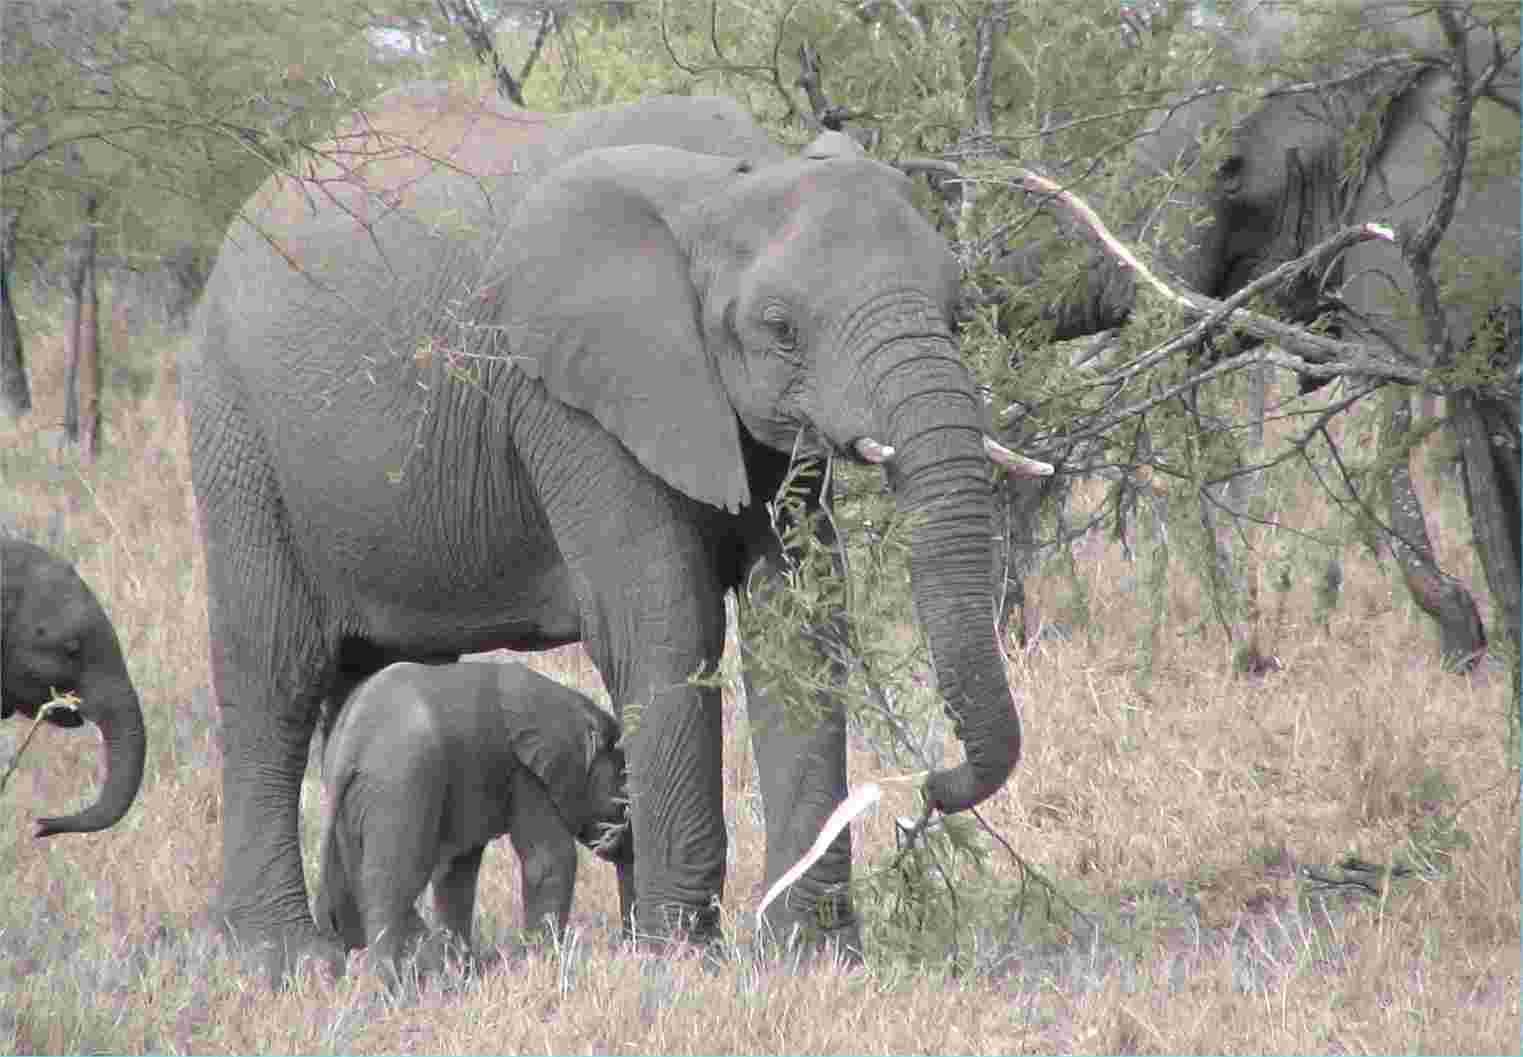 A very young elephant sticks close to other family members.  Photo by FG, Dec. 2005.